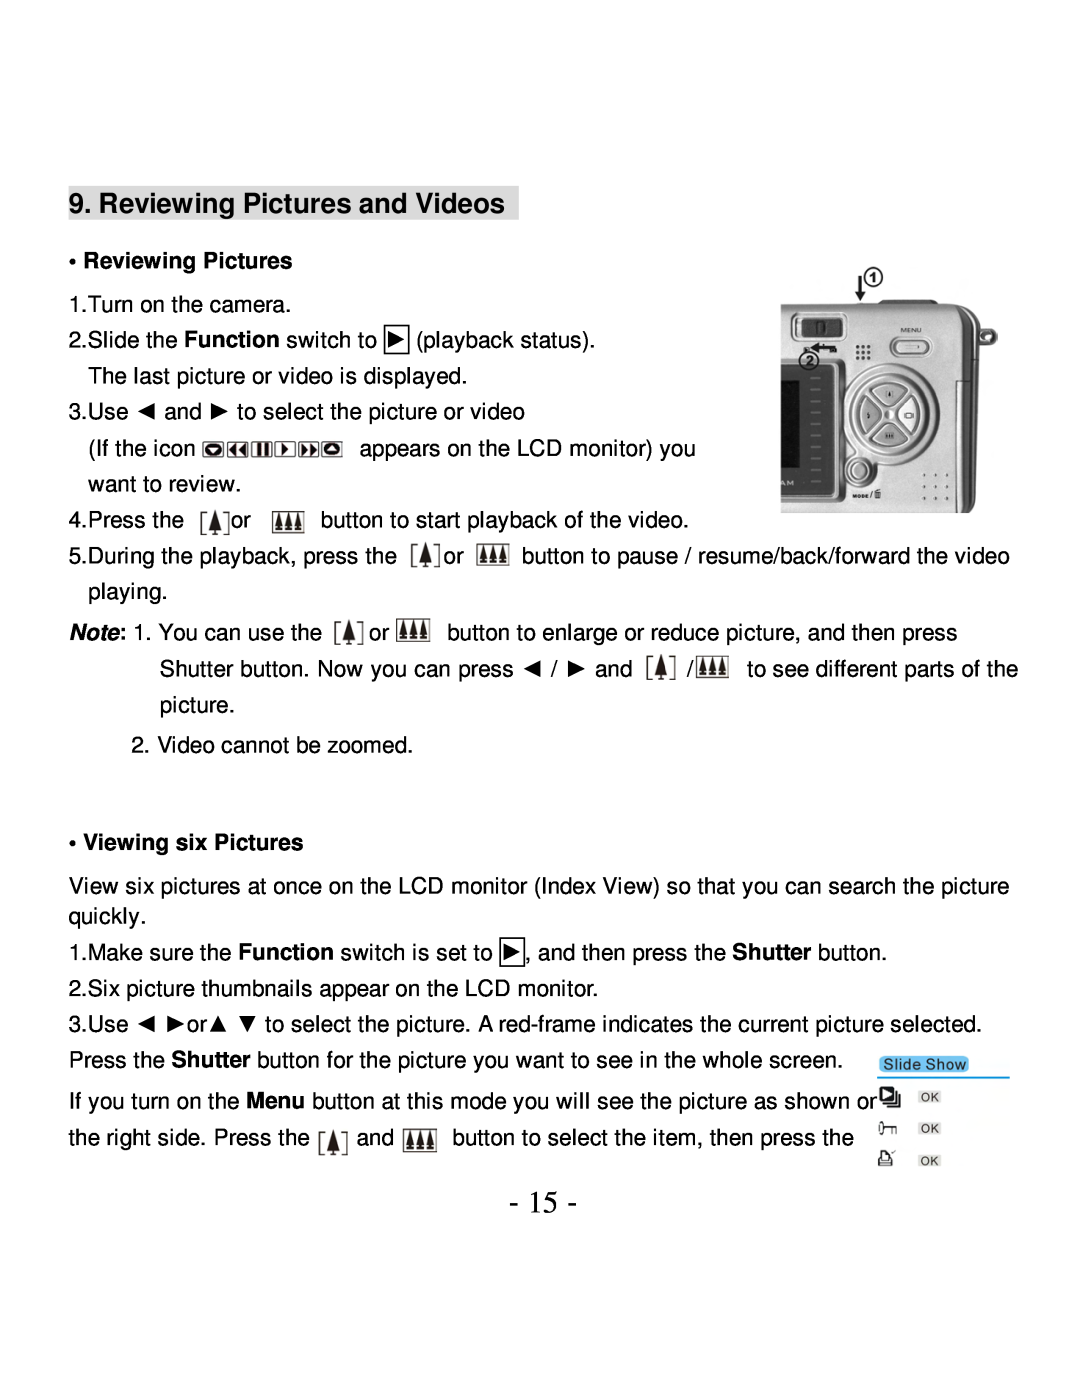 VistaQuest VQ5015 user manual Reviewing Pictures and Videos, Viewing six Pictures 